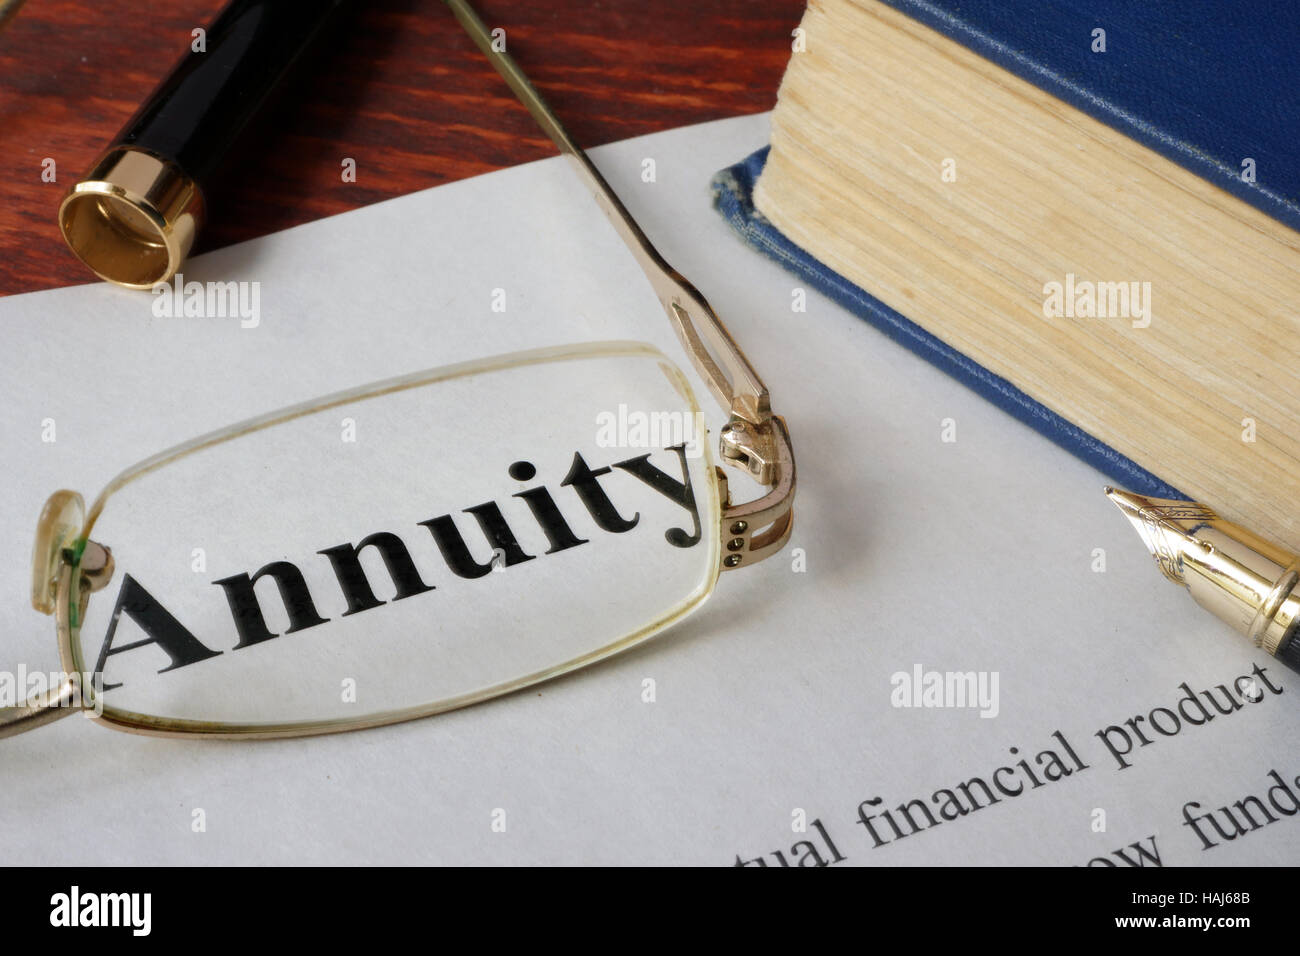 Annuity written on a paper. Finance concept. Stock Photo